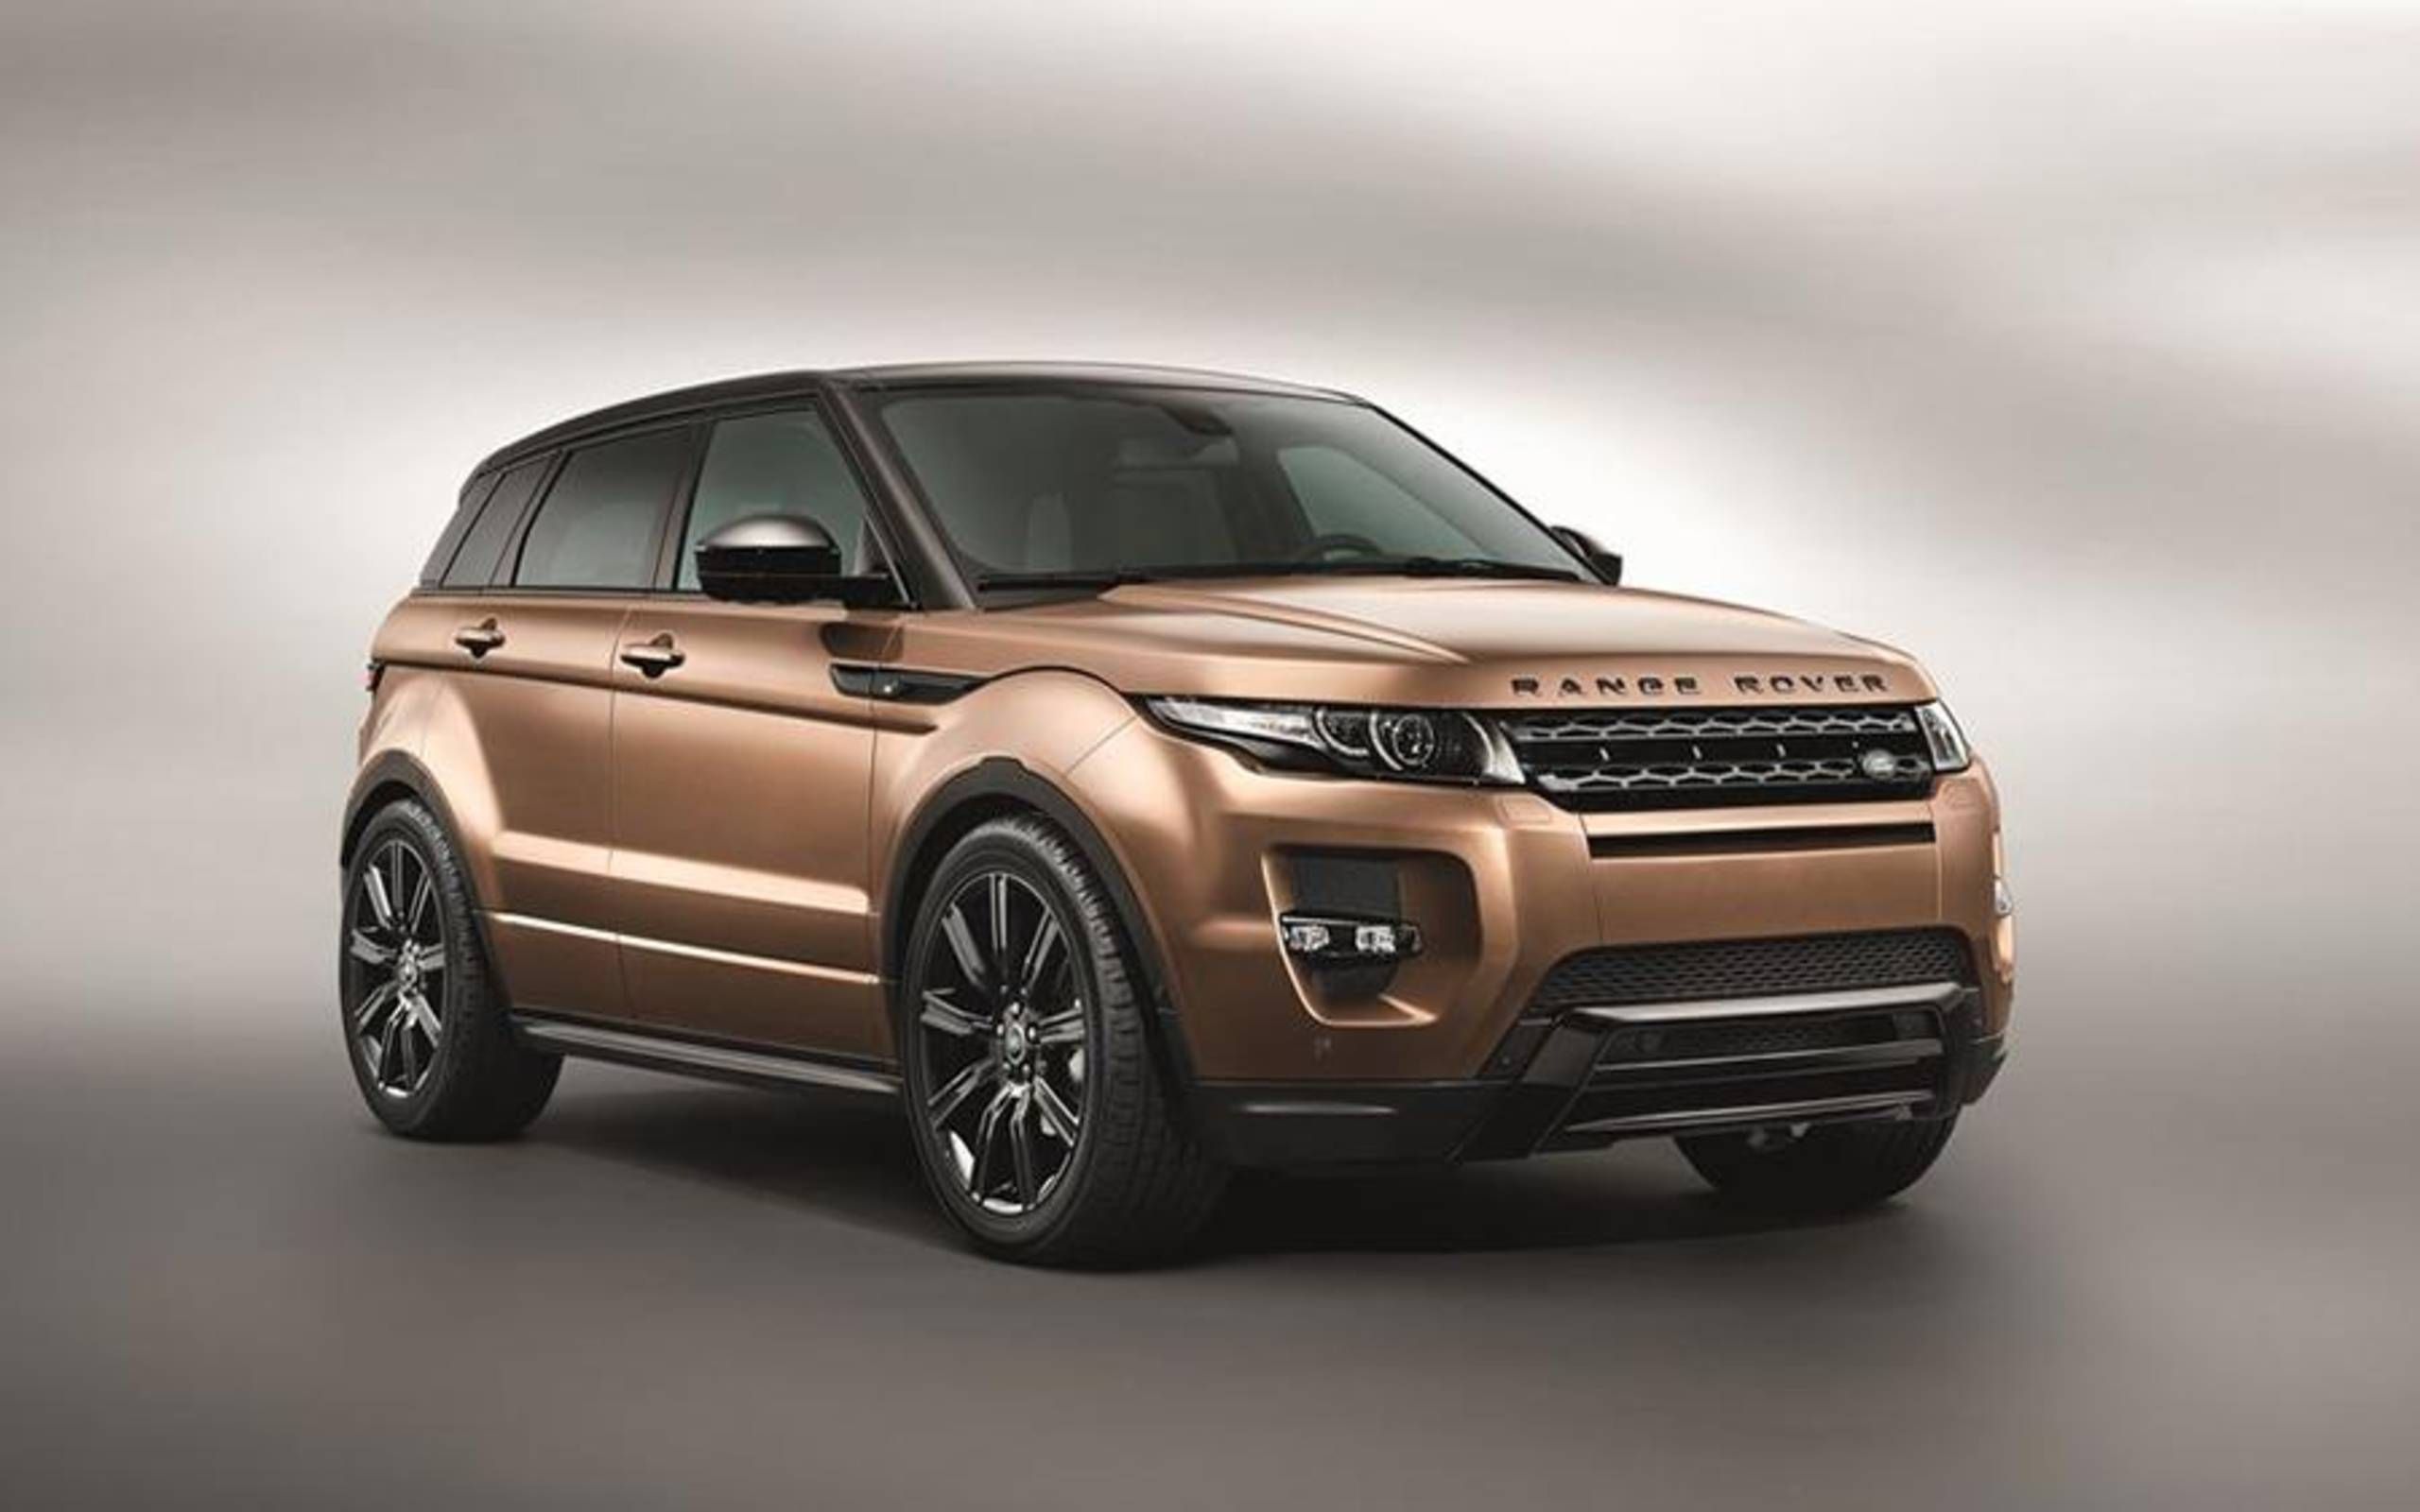 Range Rover Evoque gets some new tech for 2014